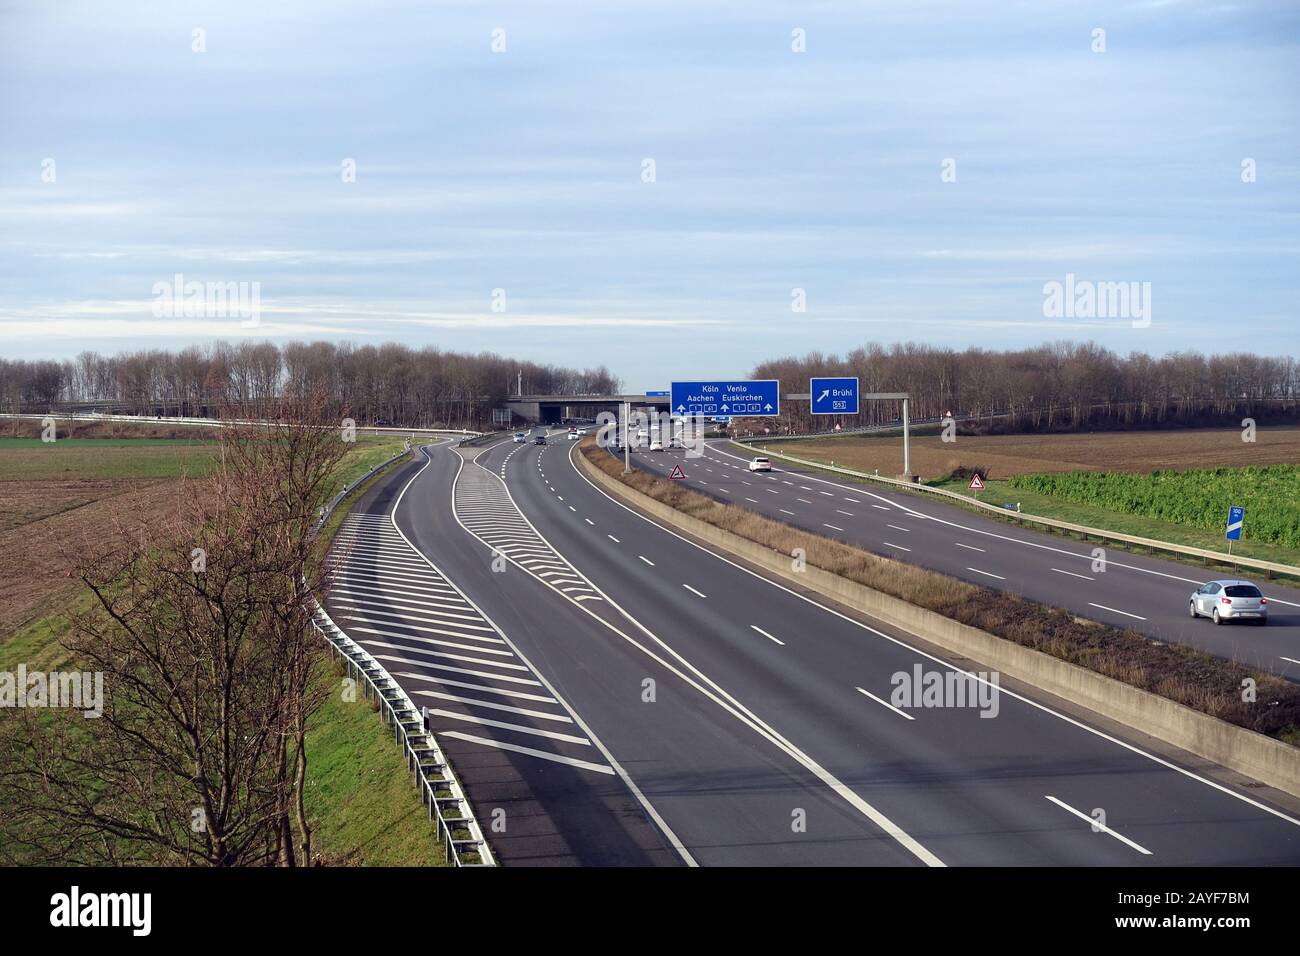 Little traffic on a Sunday on the A61 motorway at the Bliesheim interchange Stock Photo